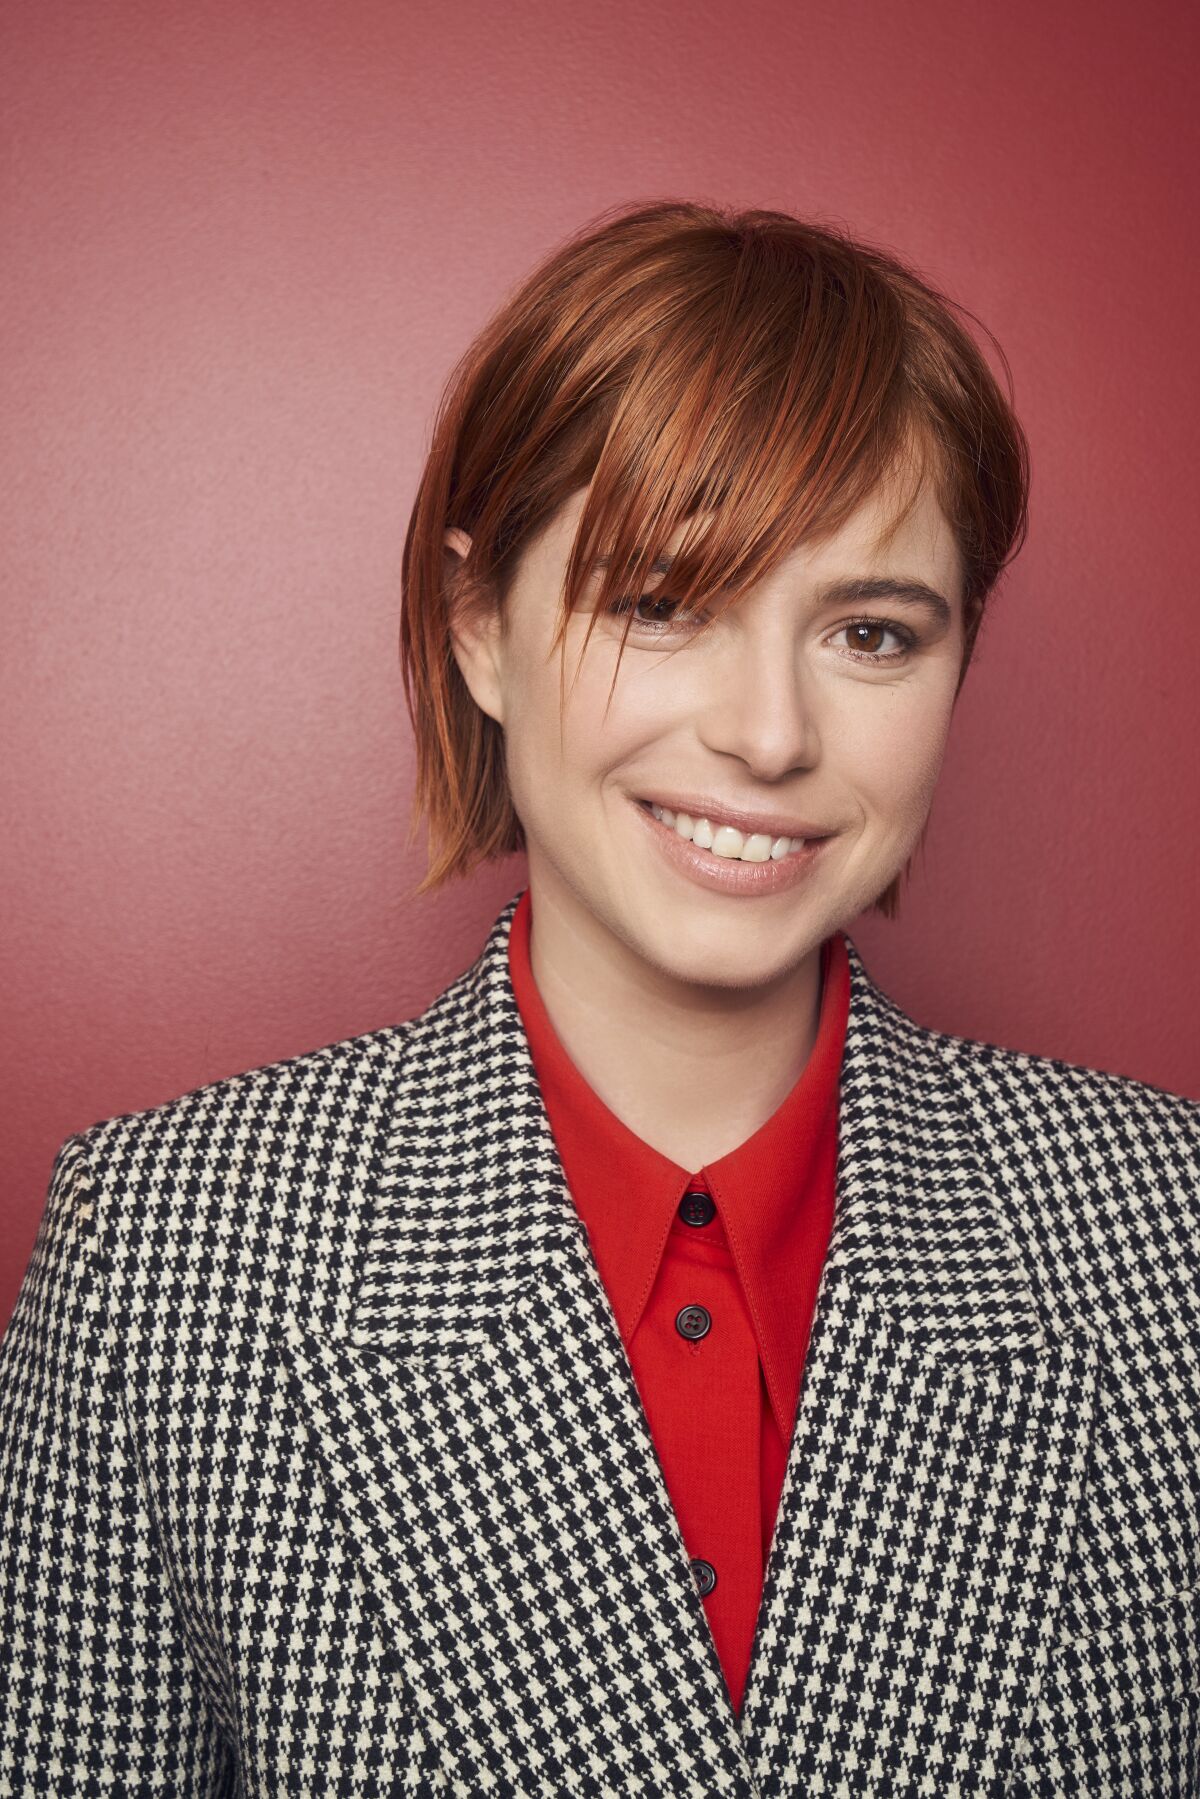 Jessie Buckley stars in Season 4 of "Fargo" and the Netflix film "I'm Thinking of Ending Things."